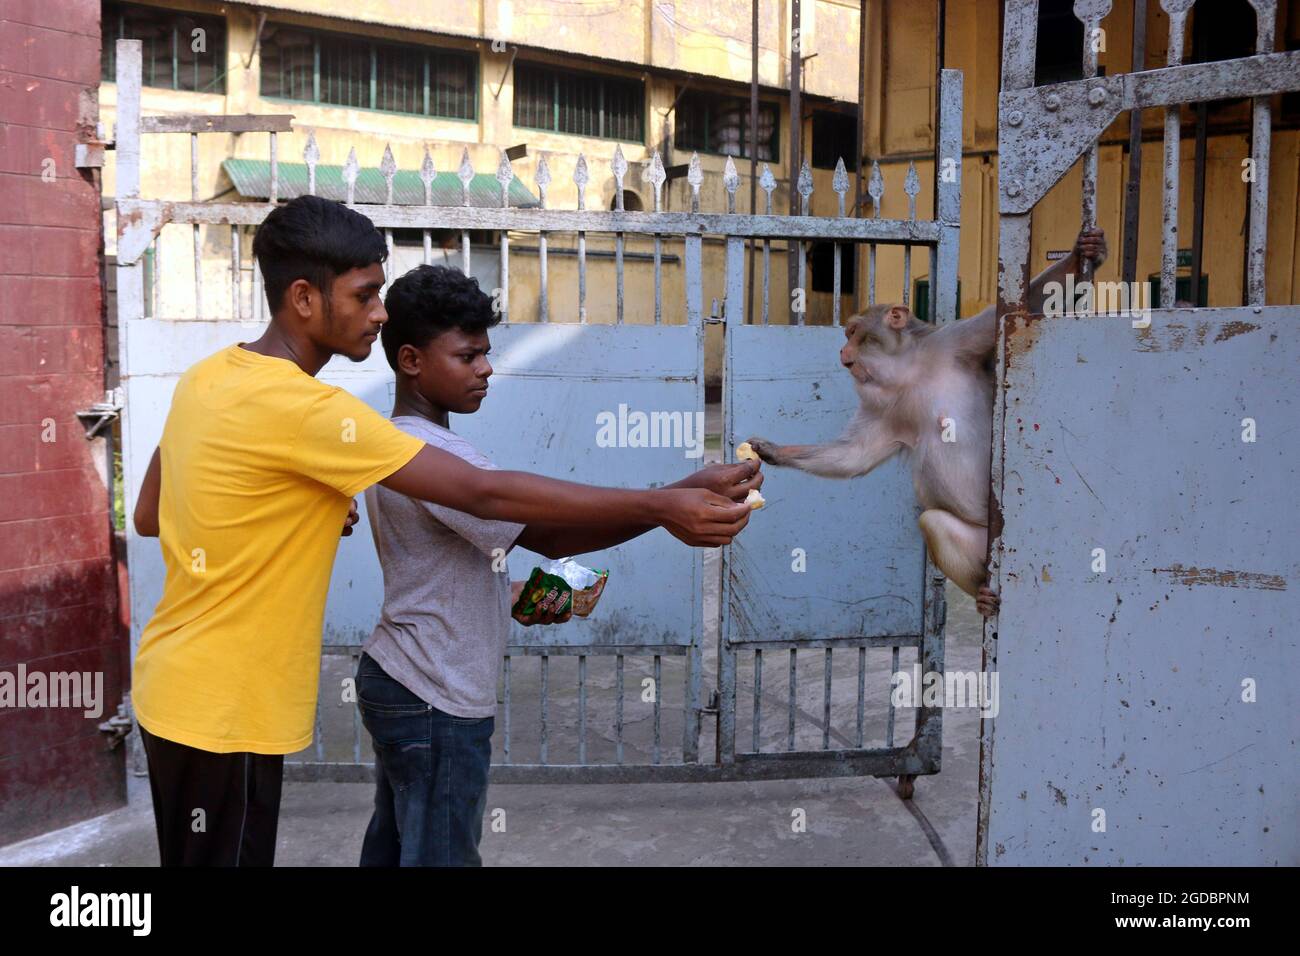 Dhaka, Bangladesh. 12th Aug, 2021. DHAKA, BANGLADESH - AUGUST 12: Japanese macaques are fed by a visitor, that walking on the streets of Gandaria amid Covid-19 pandemic. The Japanese macaque or red-faced macaque is a species of primate, that lives in forests and mountains, that have migrated to cities and live with humans in looking for food. on August 12, 2021 in Dhaka, Bangladesh. (Photo by Eyepix/Sipa USA) Credit: Sipa USA/Alamy Live News Stock Photo